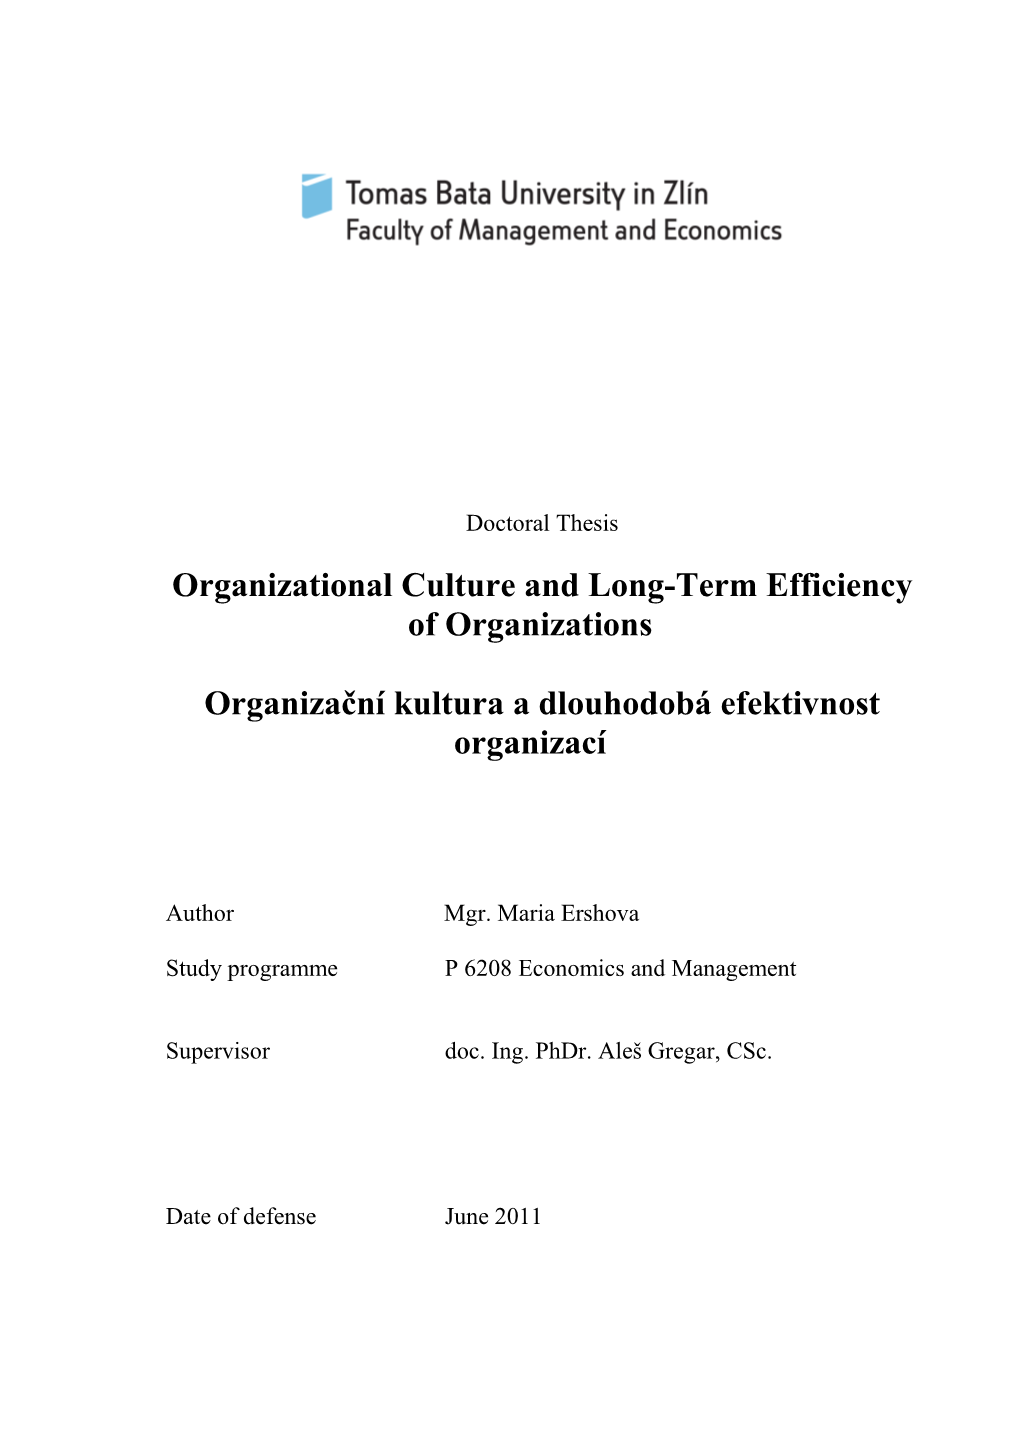 Organizational Culture and Long-Term Efficiency of Organizations